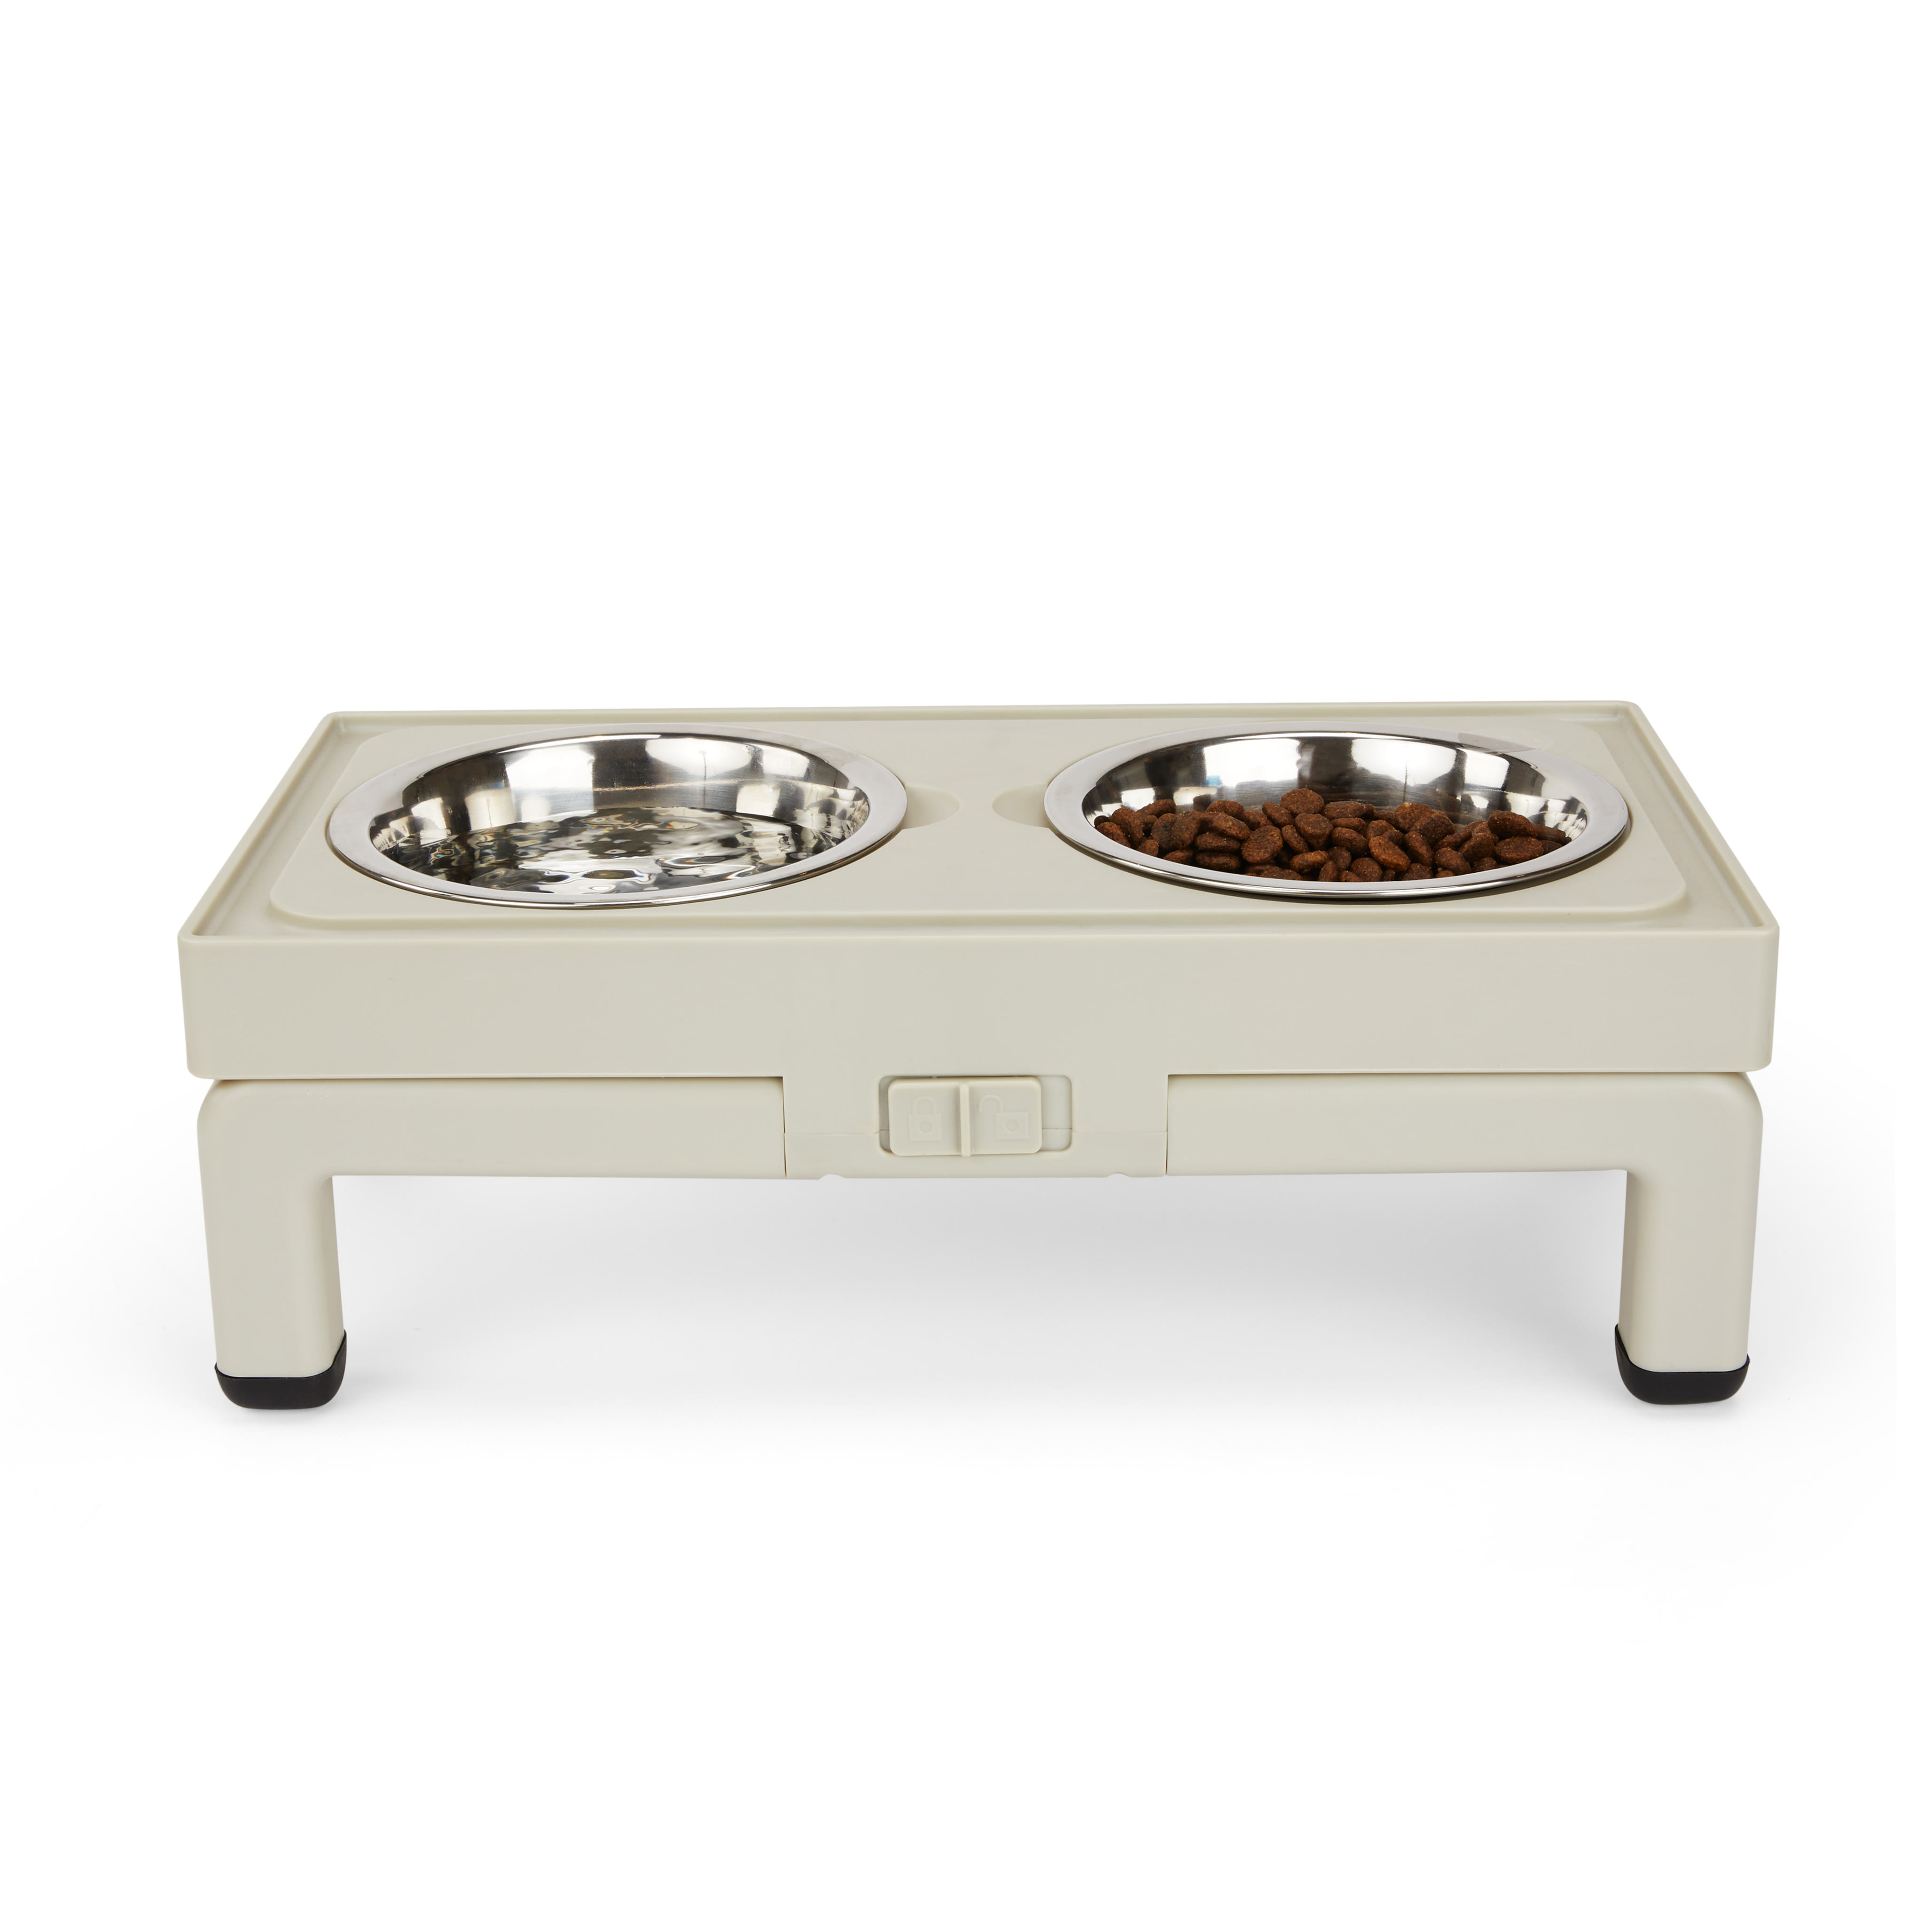 Large Dog Bowls 1700 Ml Solid Double Bowl Stand, 7.8/9.8/11.8 Inch